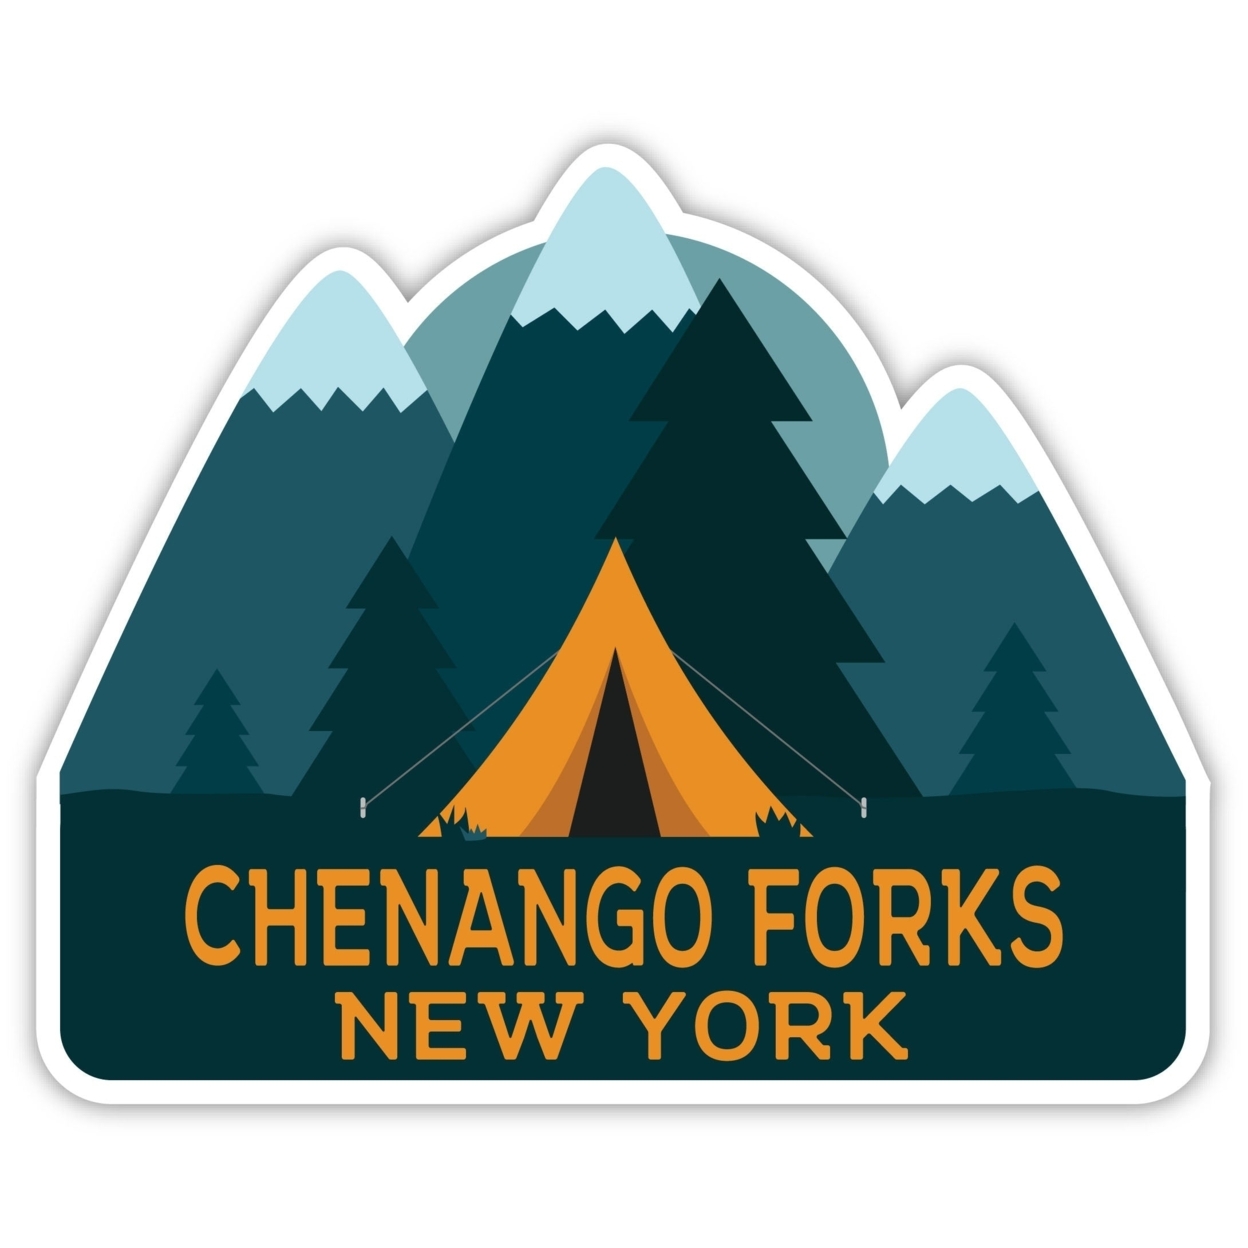 Chenango Forks New York Souvenir Decorative Stickers (Choose Theme And Size) - 4-Pack, 2-Inch, Tent